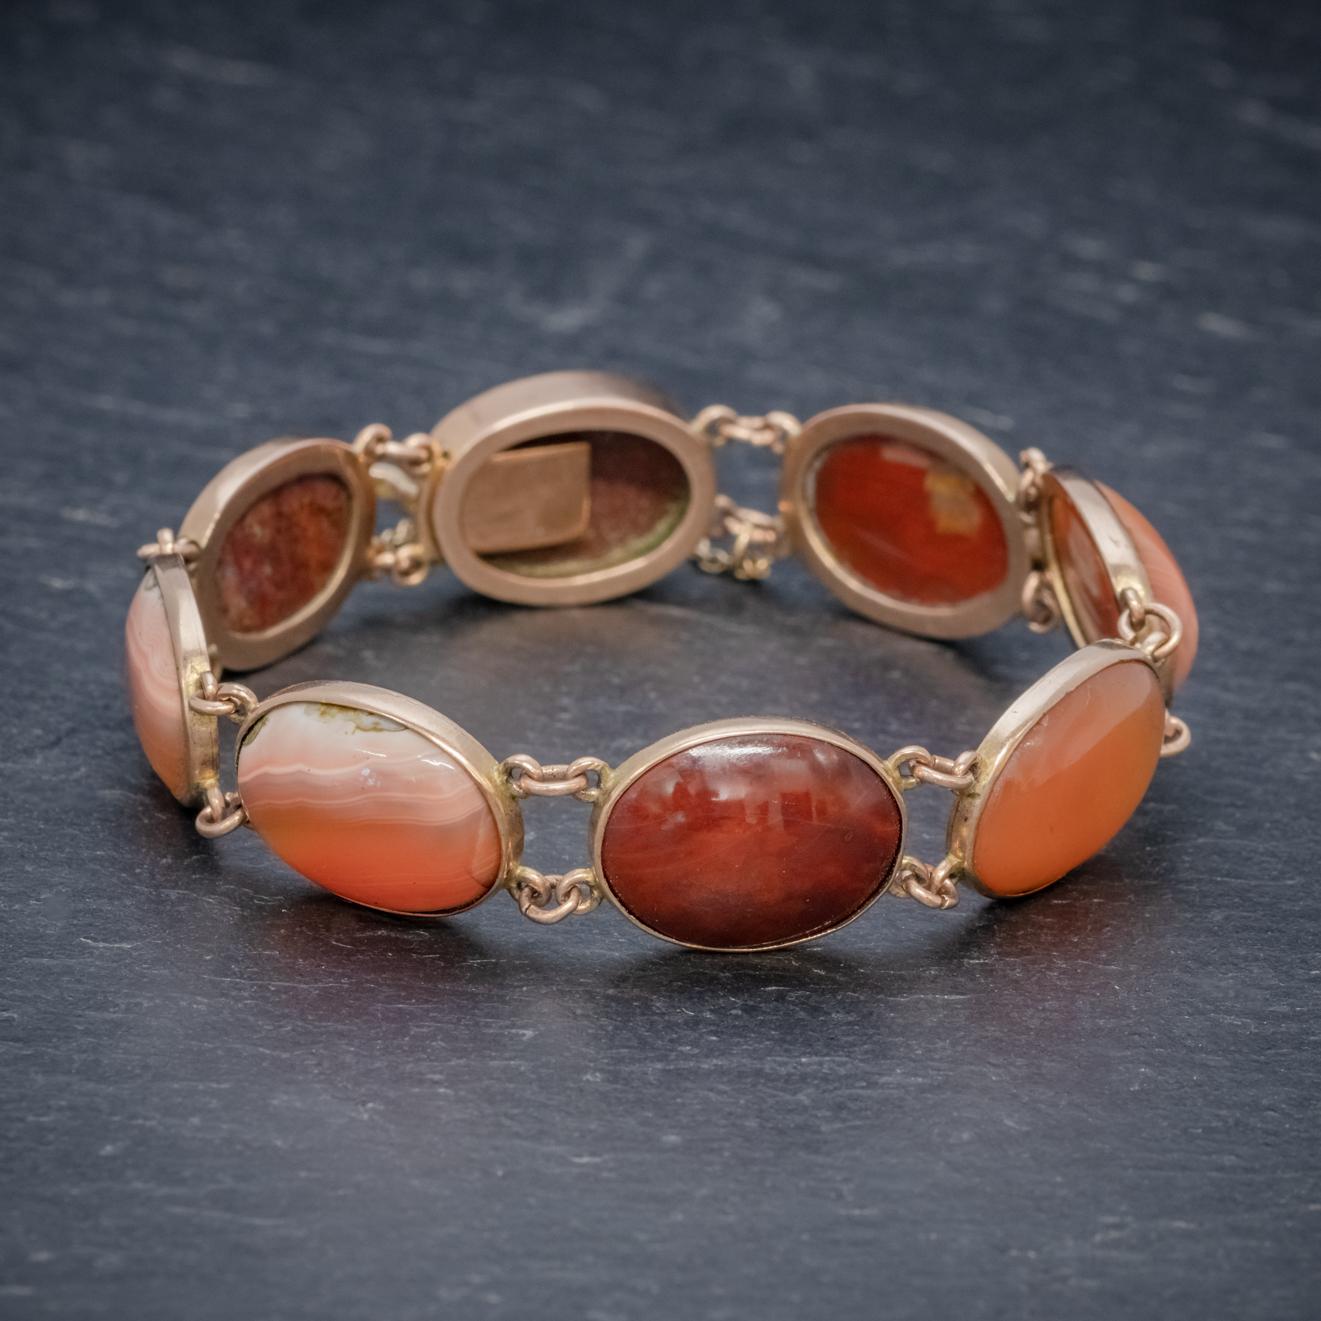 An exquisite Antique Victorian Scottish bracelet made up of beautiful banded Agates and Carnelian stones which are approx. 7ct each.

Each stone has been polished and displays unique patterning and earthy brown and amber colouring which is simply